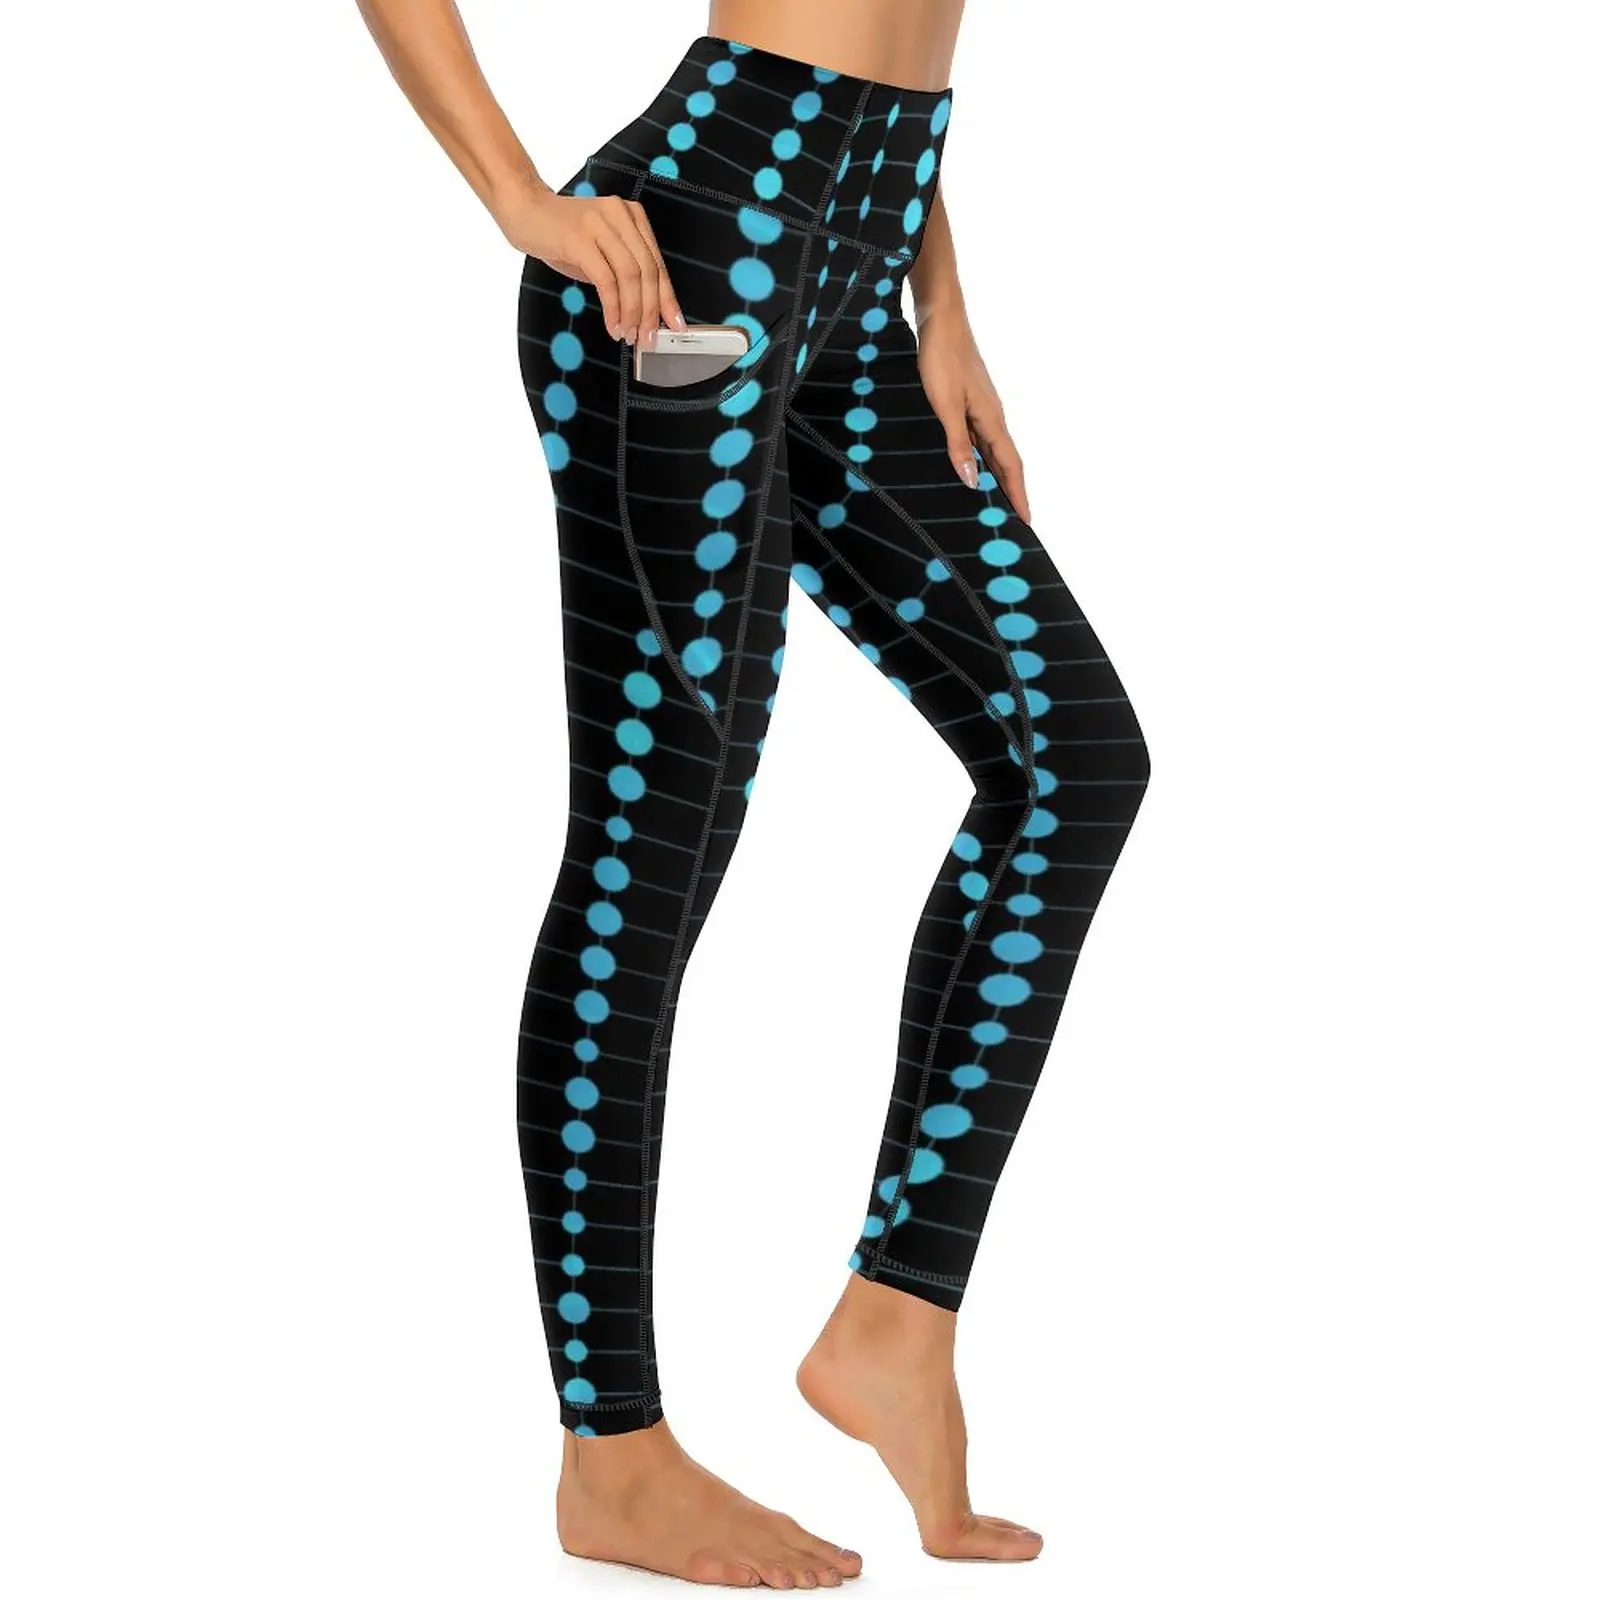 

Blue Dots And Stripes Leggings Sexy Modern Art Push Up Yoga Pants Sweet Stretch Leggins Pockets Design Work Out Sports Tights